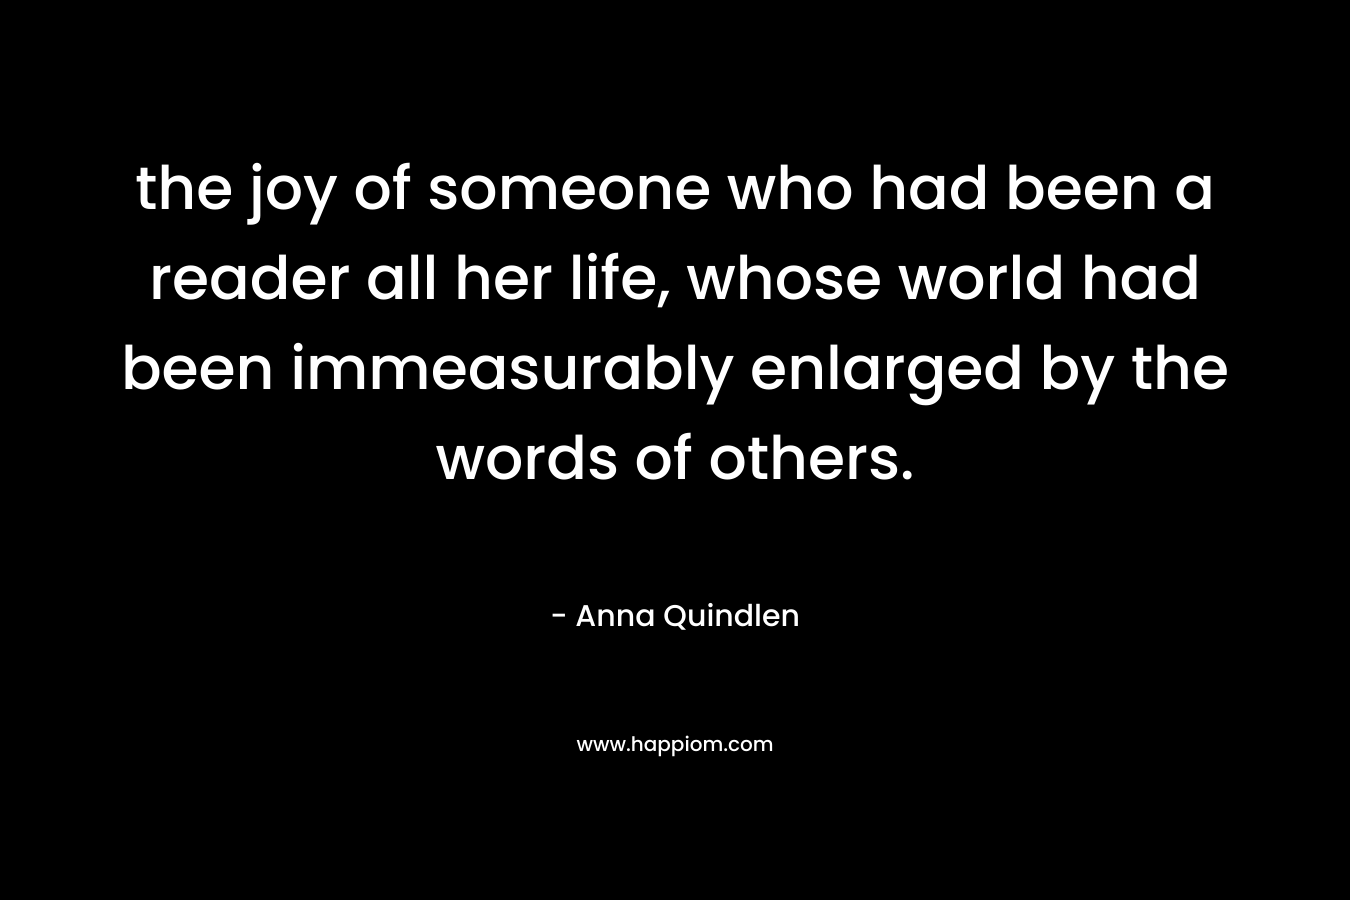 the joy of someone who had been a reader all her life, whose world had been immeasurably enlarged by the words of others. – Anna Quindlen